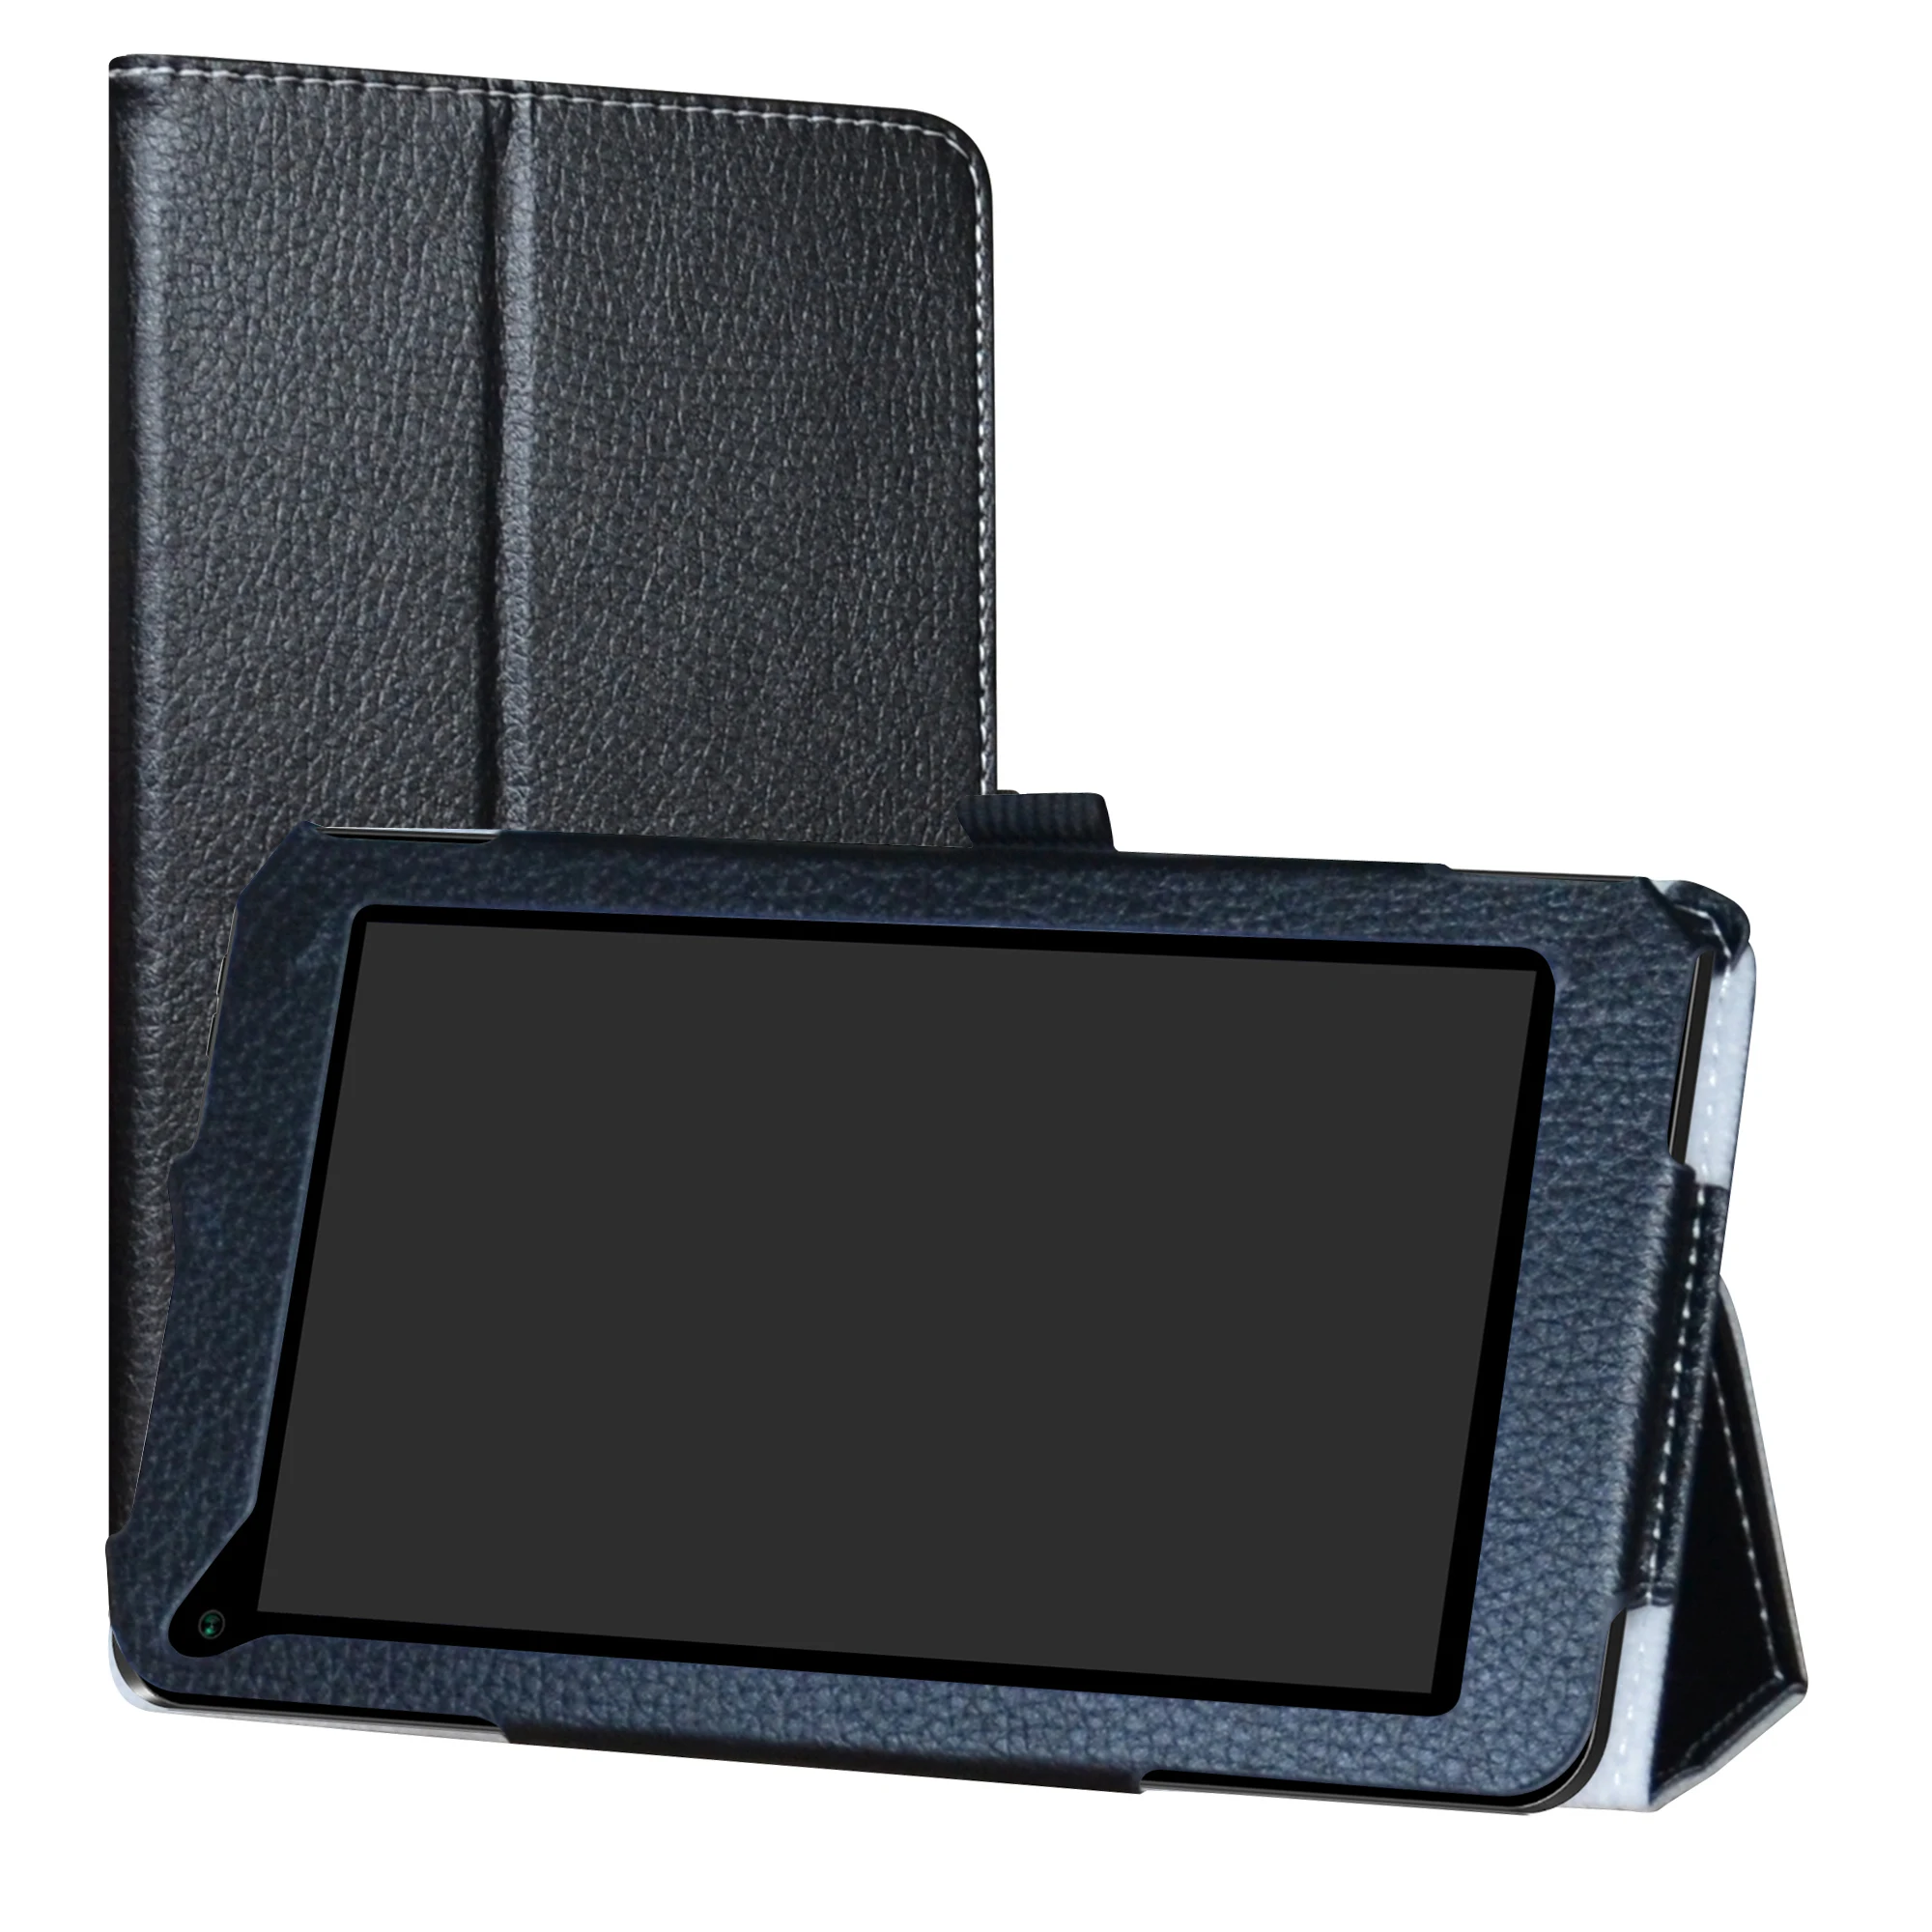 Case For  Smartab 7 ST7150 7.0" Tablet  Folding Stand PU Leather Cover with Magnetic Closure